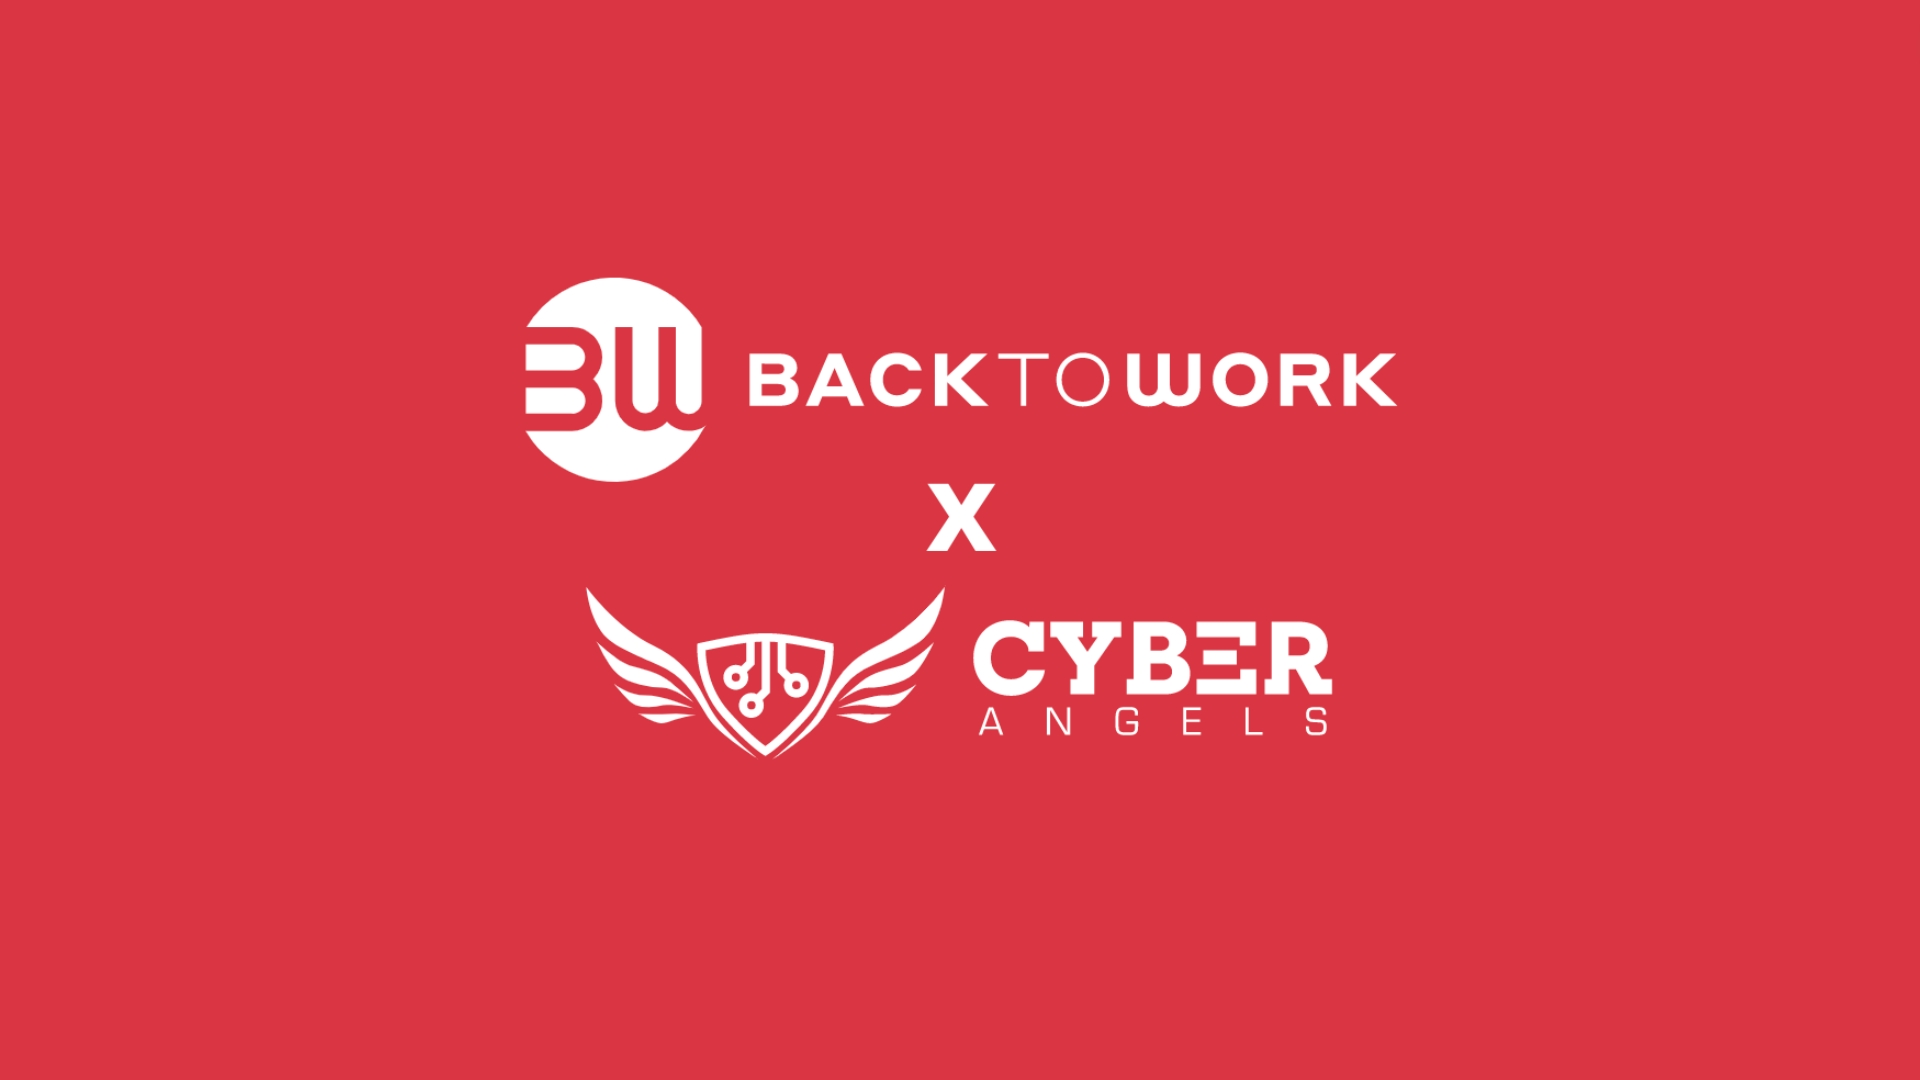 Cyber security and investment: Cyberangels and Backtowork's collaboration for informed investors